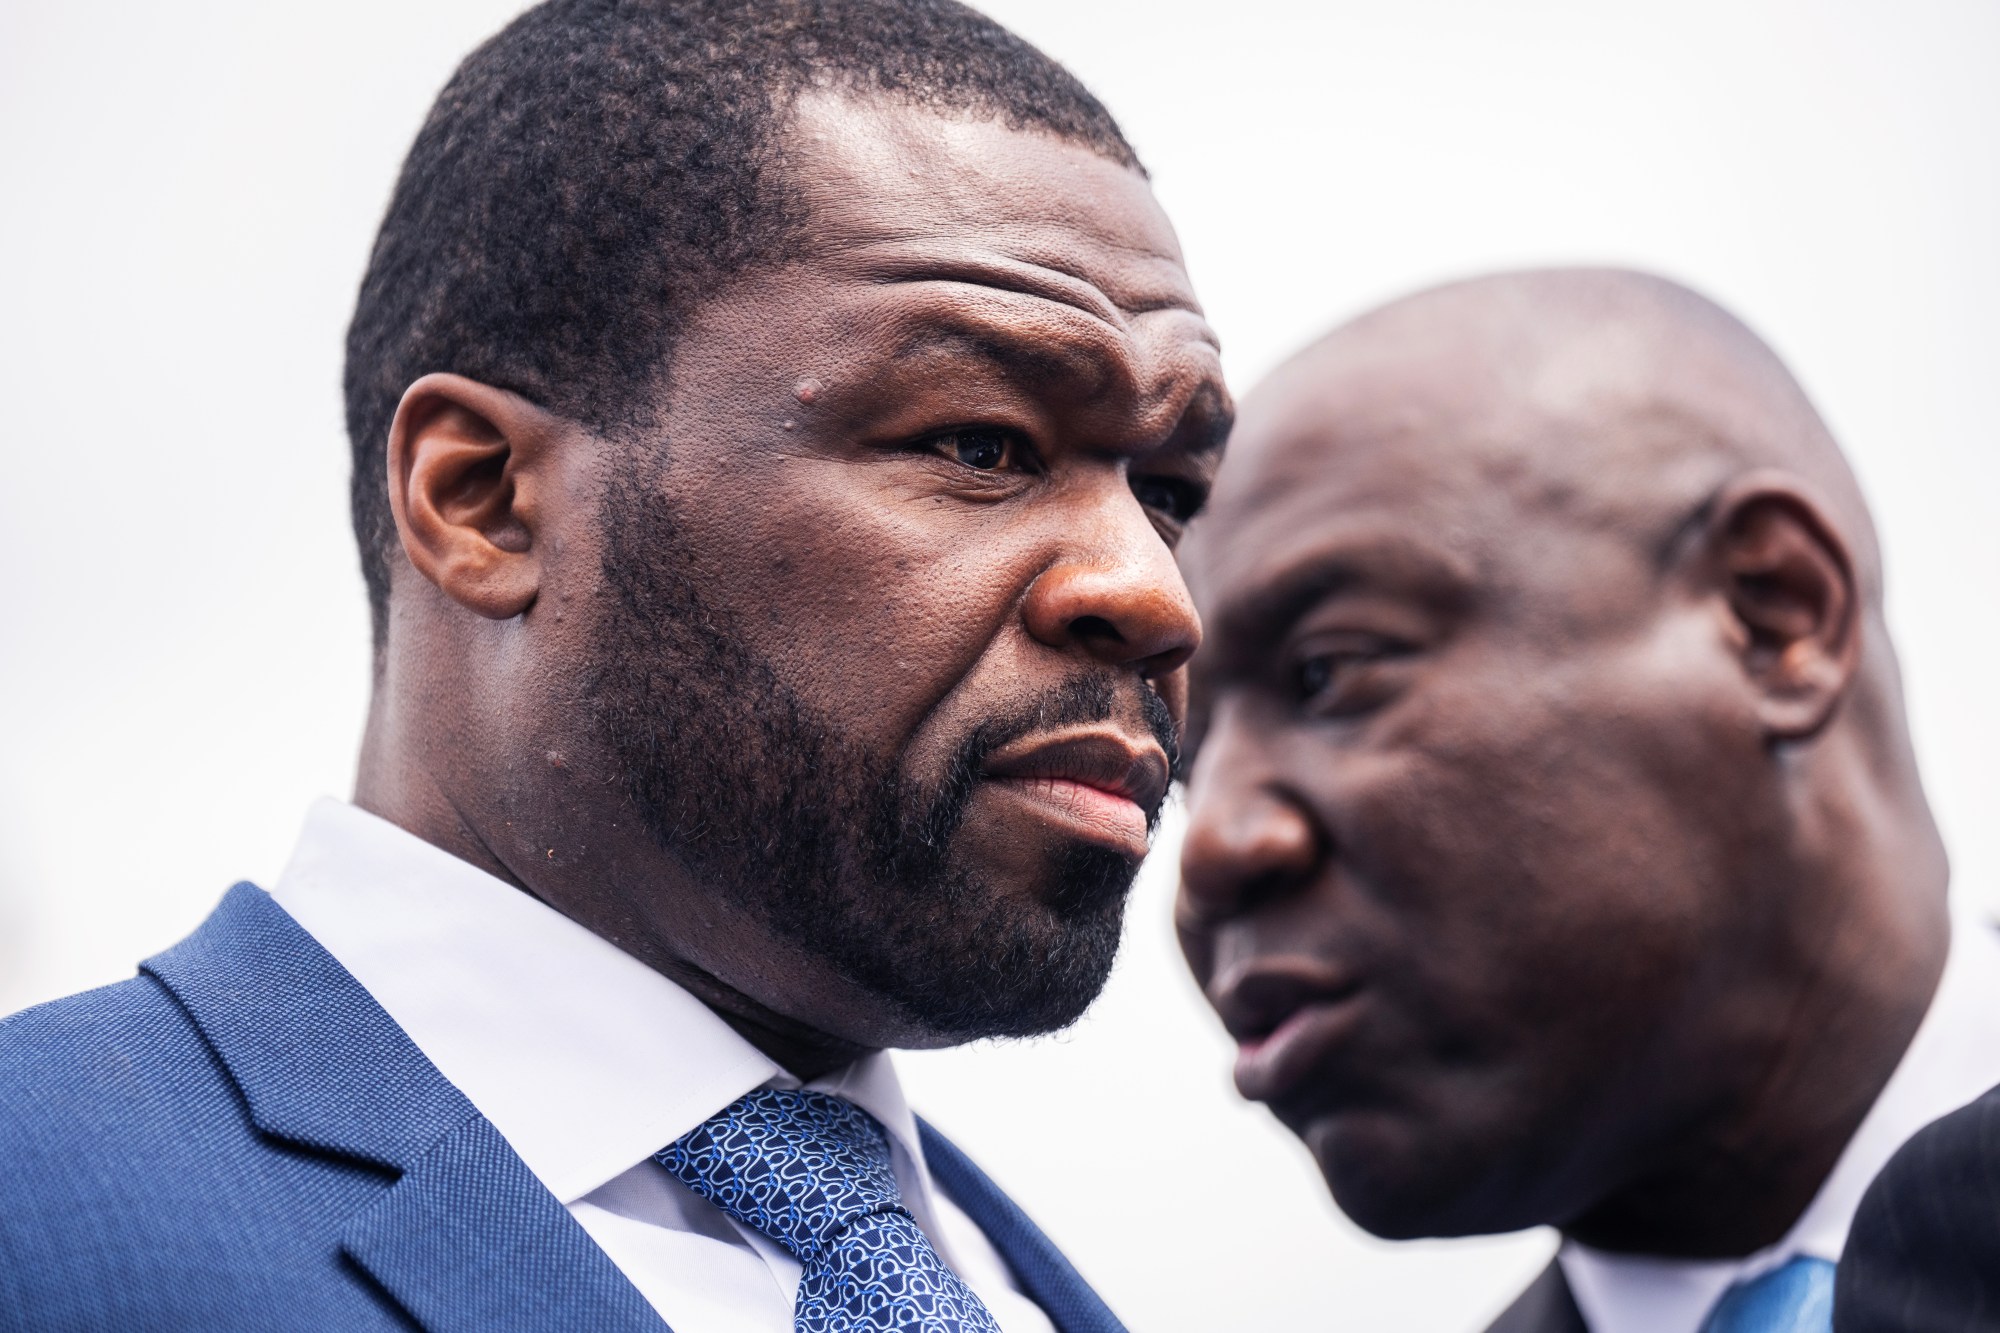 50 Cent Taps Ben Crump For Legal Battle With Spirits Company [Video]